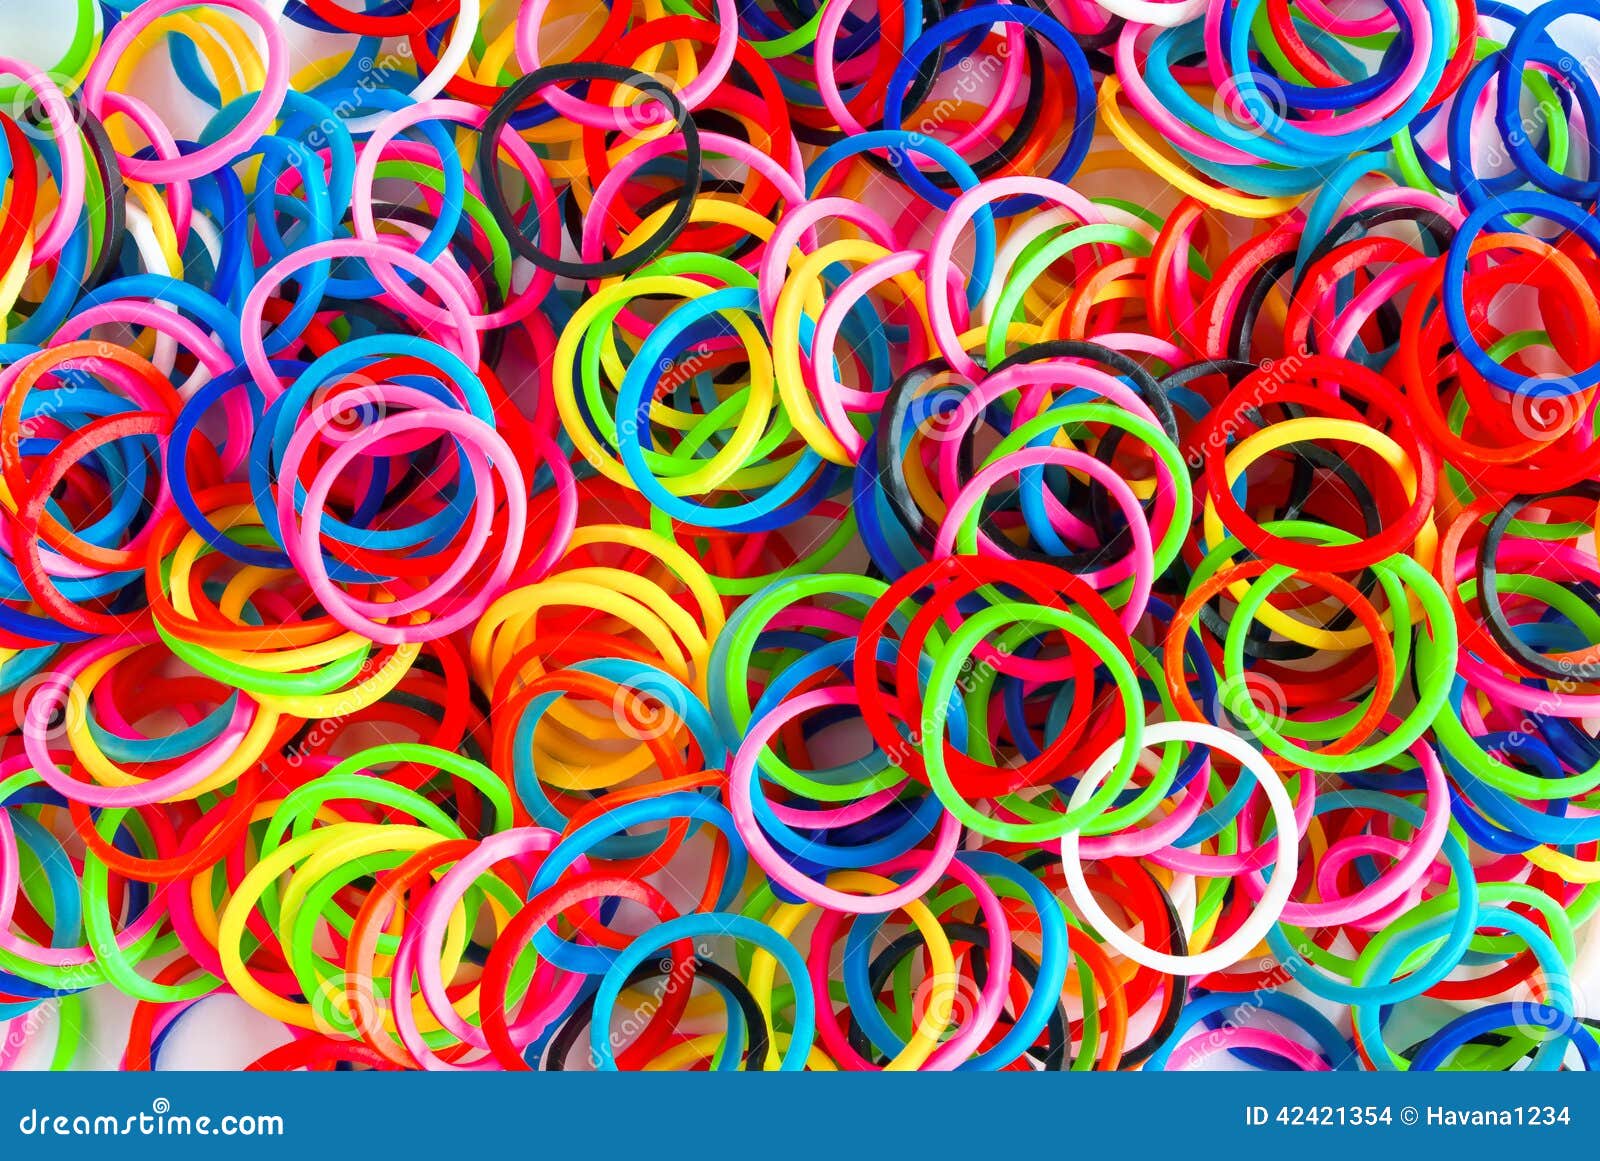 3,358 Loom Band Images, Stock Photos, 3D objects, & Vectors